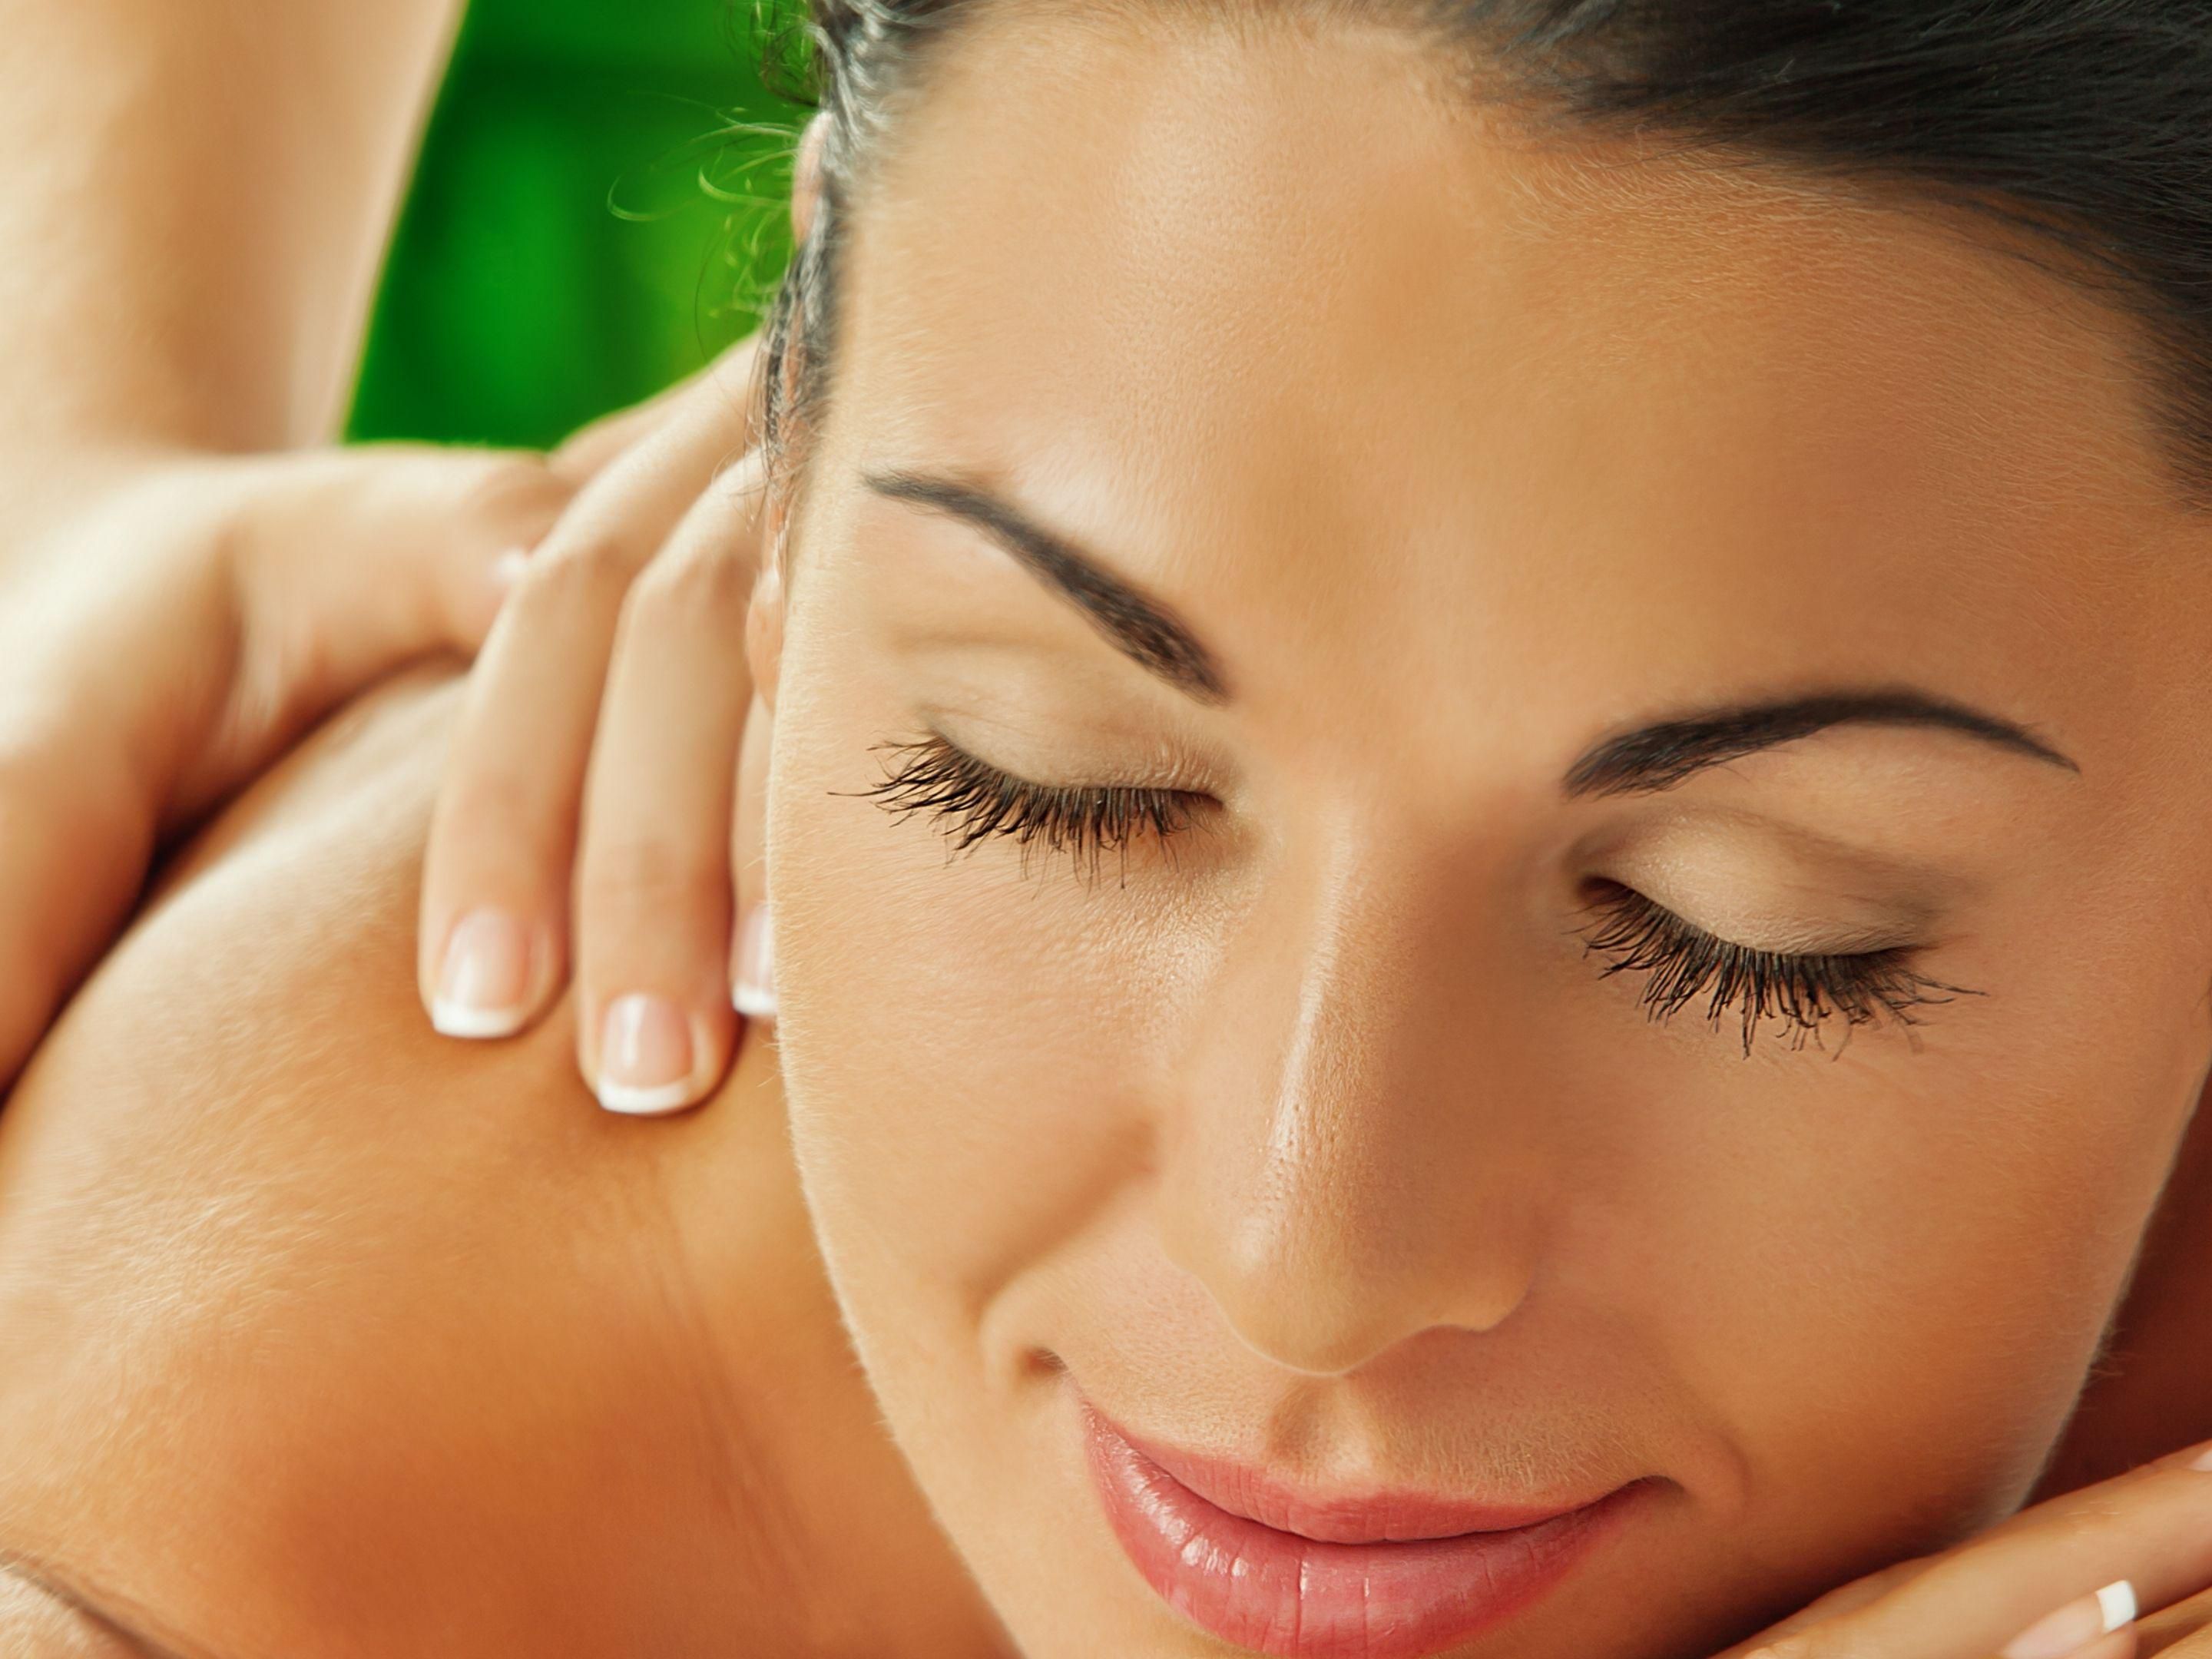 Embark on a journey of rejuvenation and relaxation at Holiday Inn & Suites SPA with an array of nurturing elements from our unique spa brands and expert therapists. Indulge in tranquillizing massage therapies, personalized treatments and reviving facials to recharge and rewind mind, body and soul.